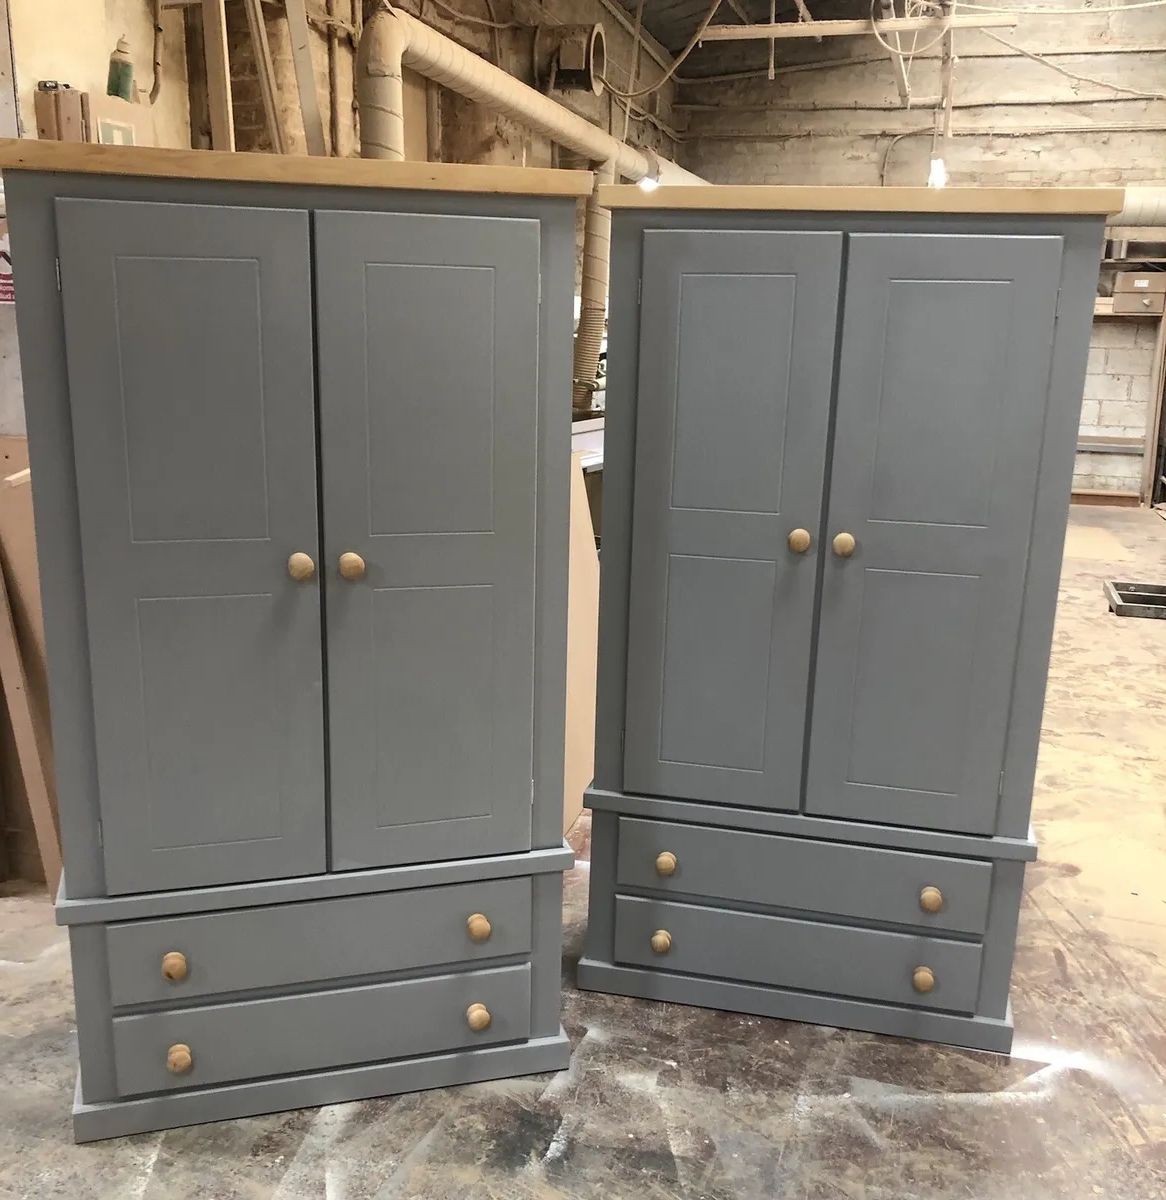 Handmade Aylesbury Grey Double Twin Wardrobes For Sale … | Ebay In Cheap Double Wardrobes (Gallery 11 of 20)